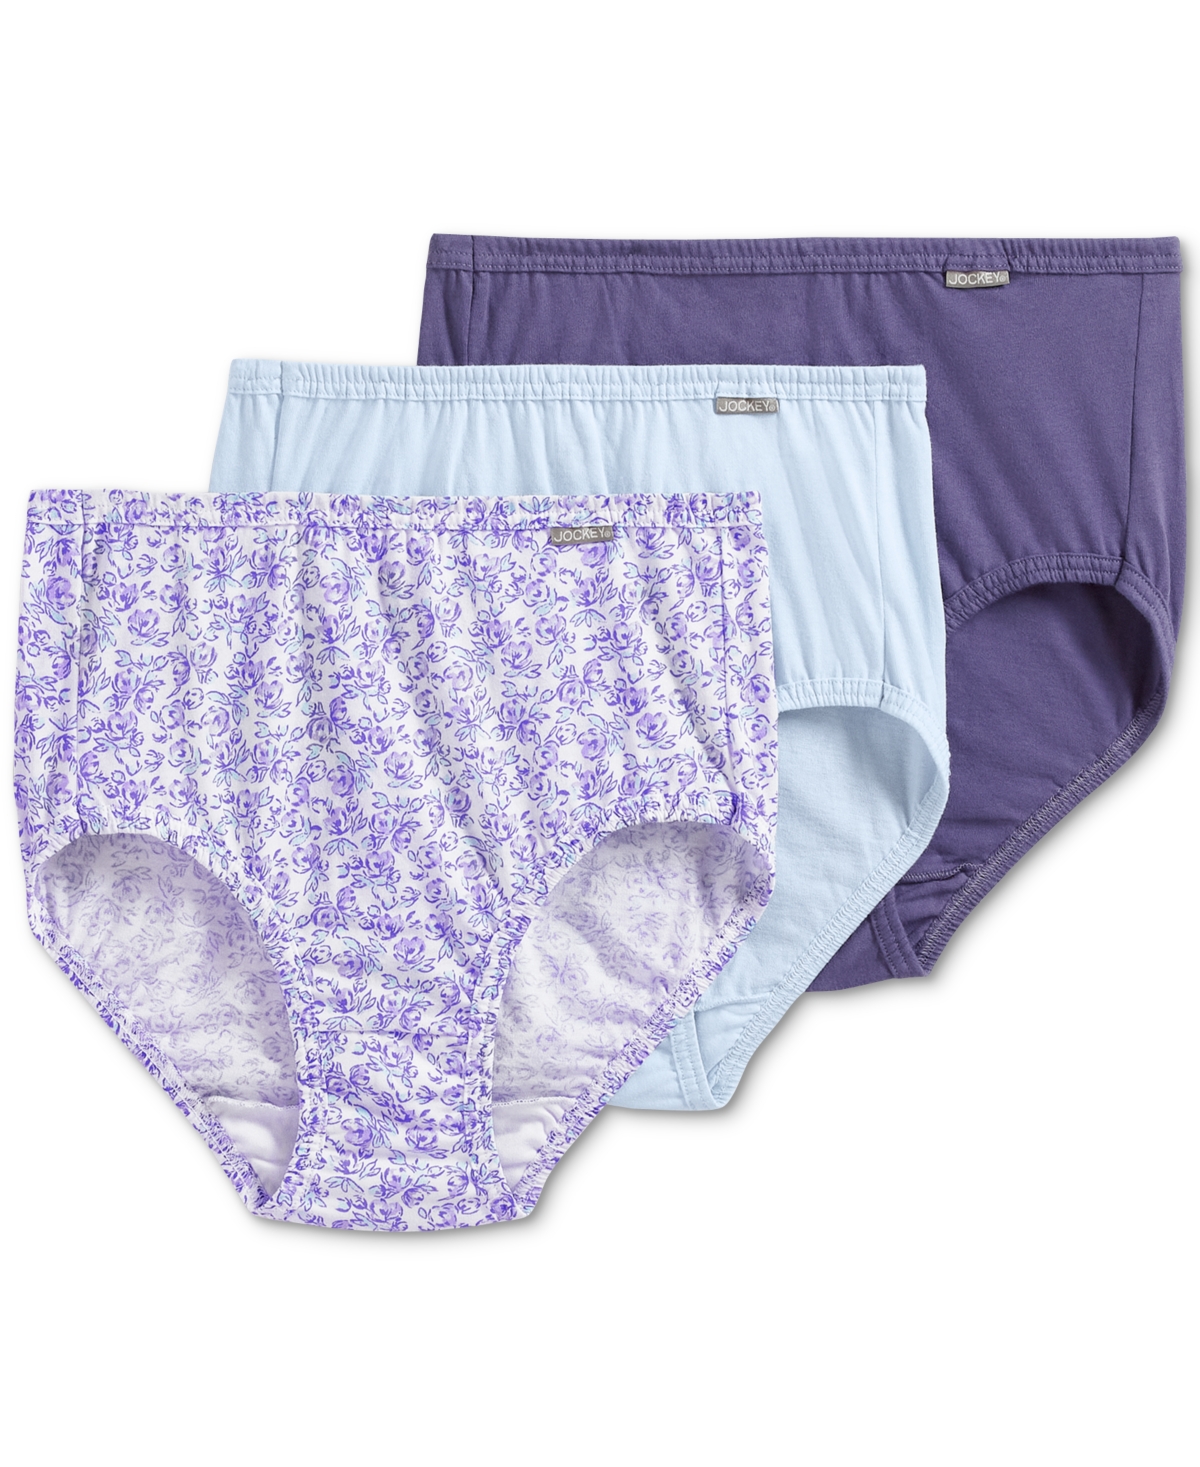 Elance Brief 3 Pack Underwear 1484, 1486 Extended Sizes - Oatmeal Heather/Boysenberry Heather/Perf